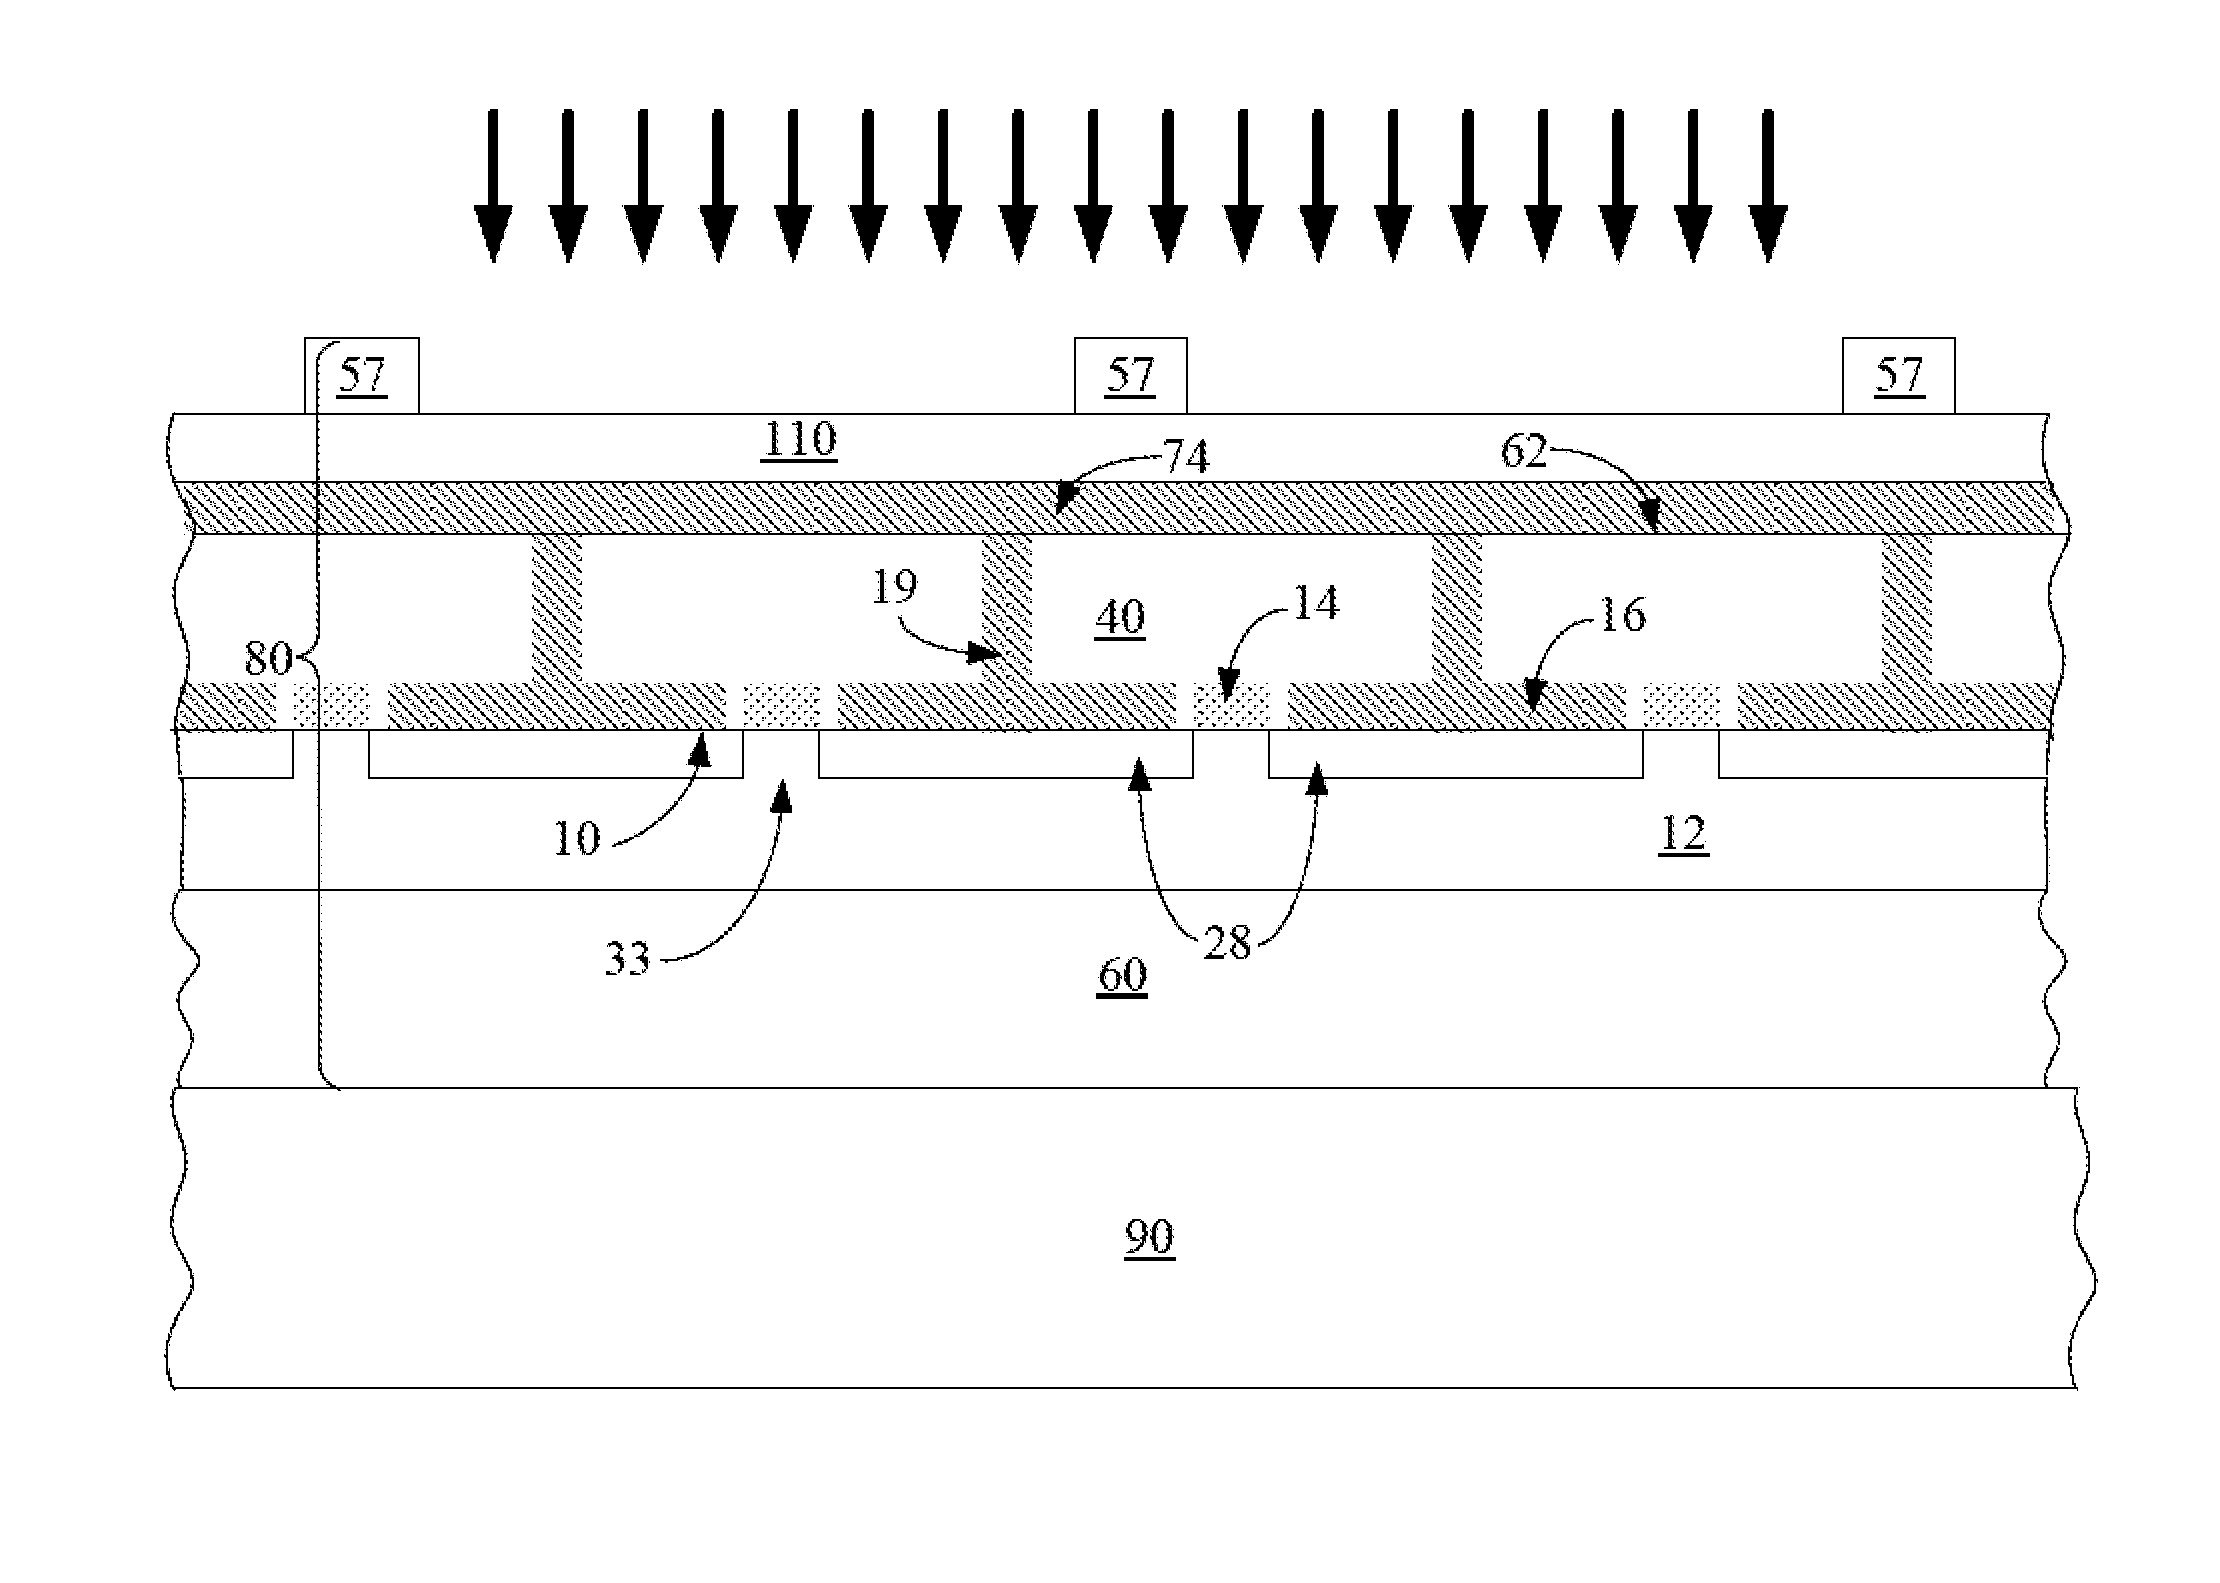 Photovoltaic cell comprising a thin lamina having emitter formed at light-facing and back surfaces